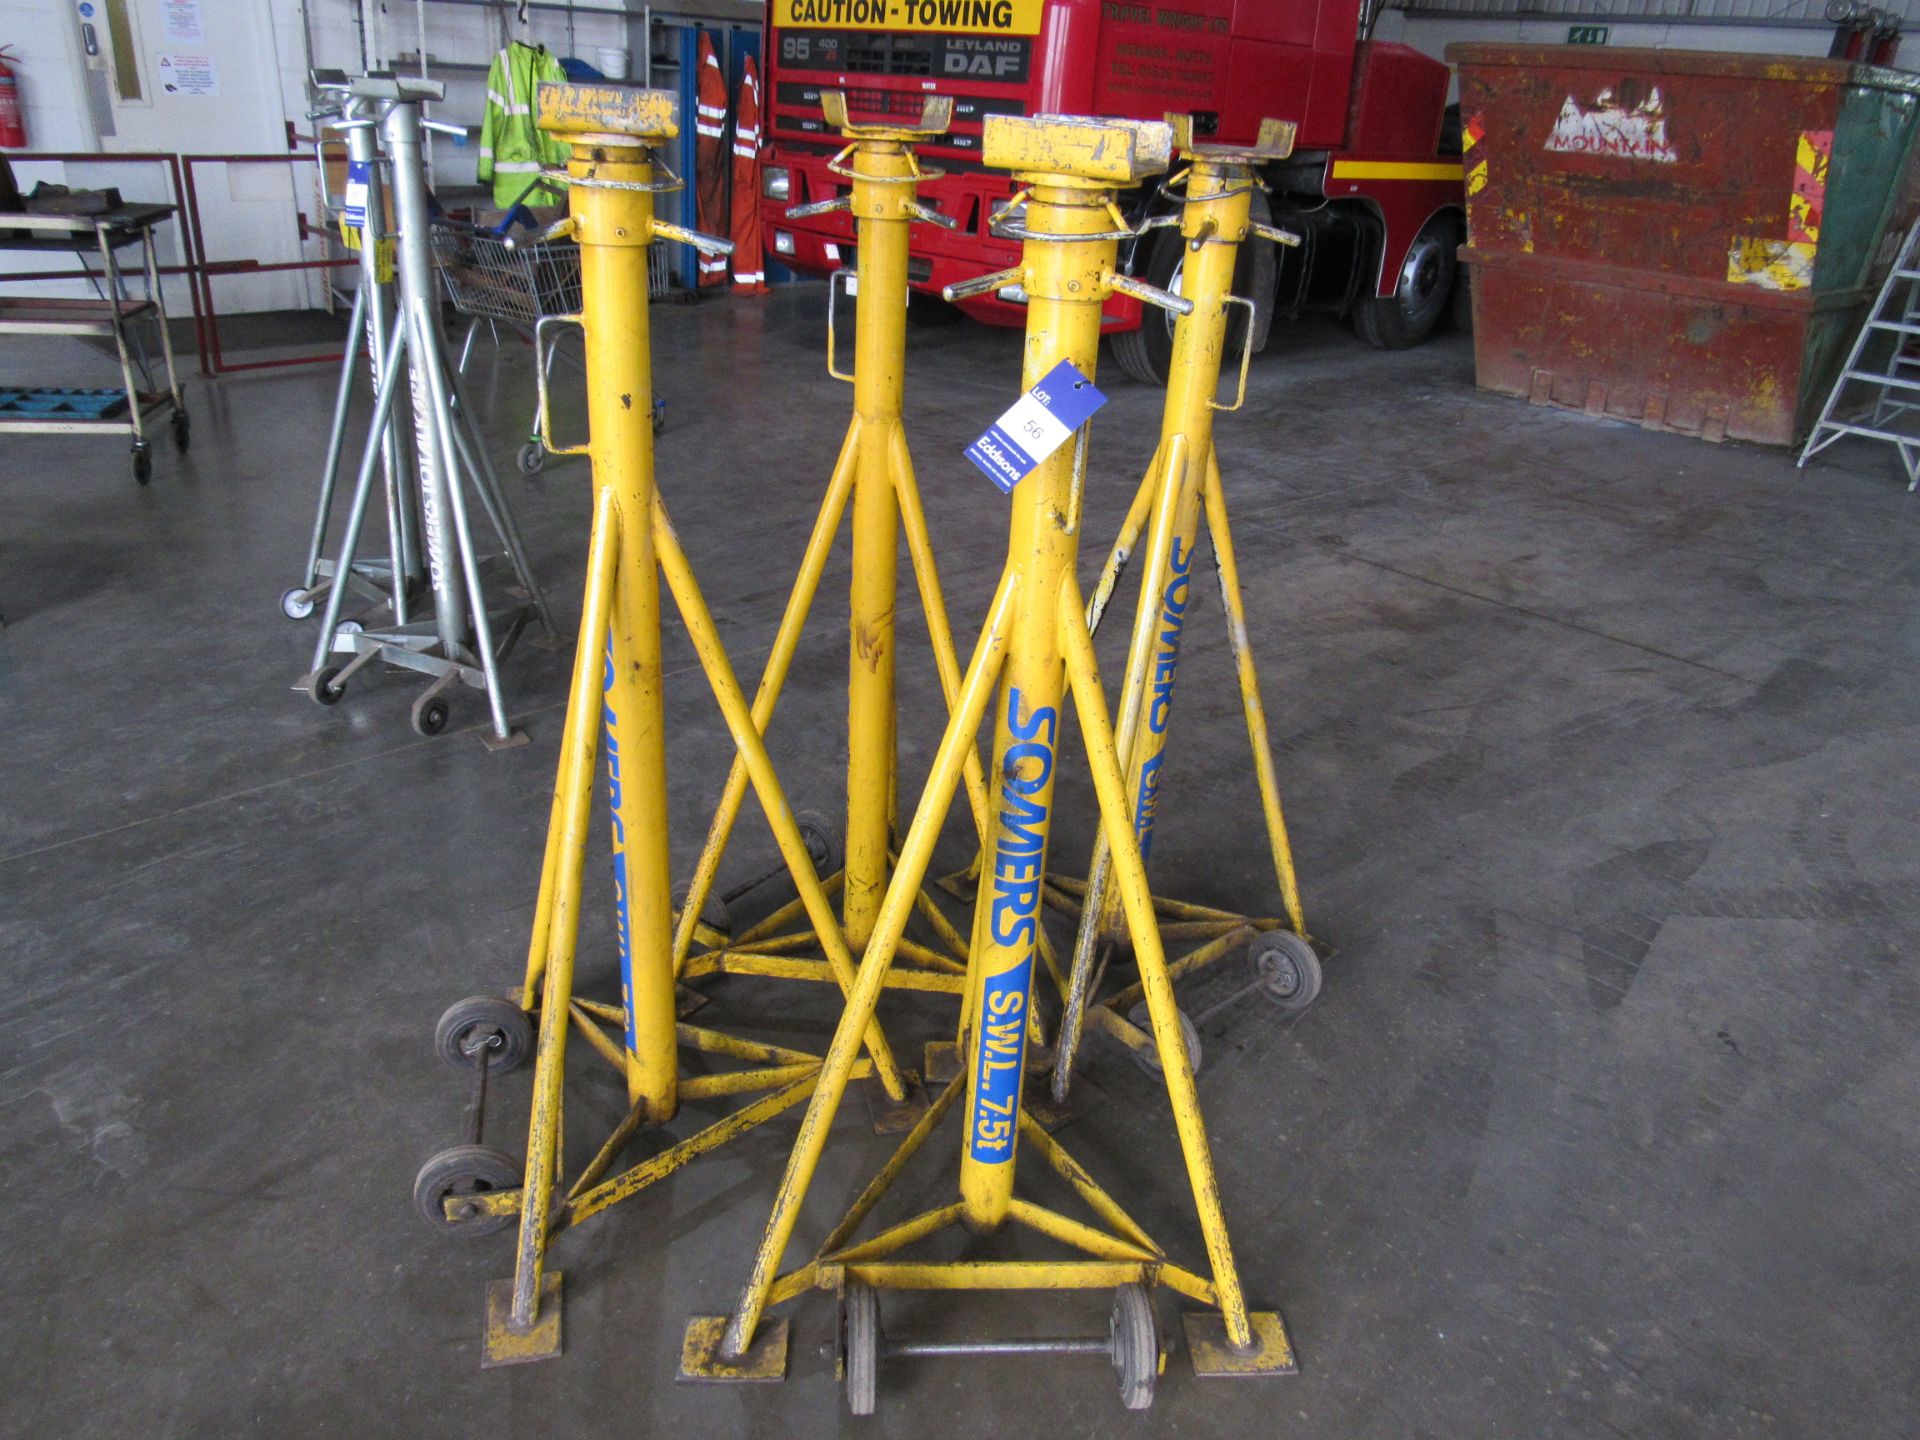 4 Somers 7.5t Vehicle Axle Stands - Image 2 of 3